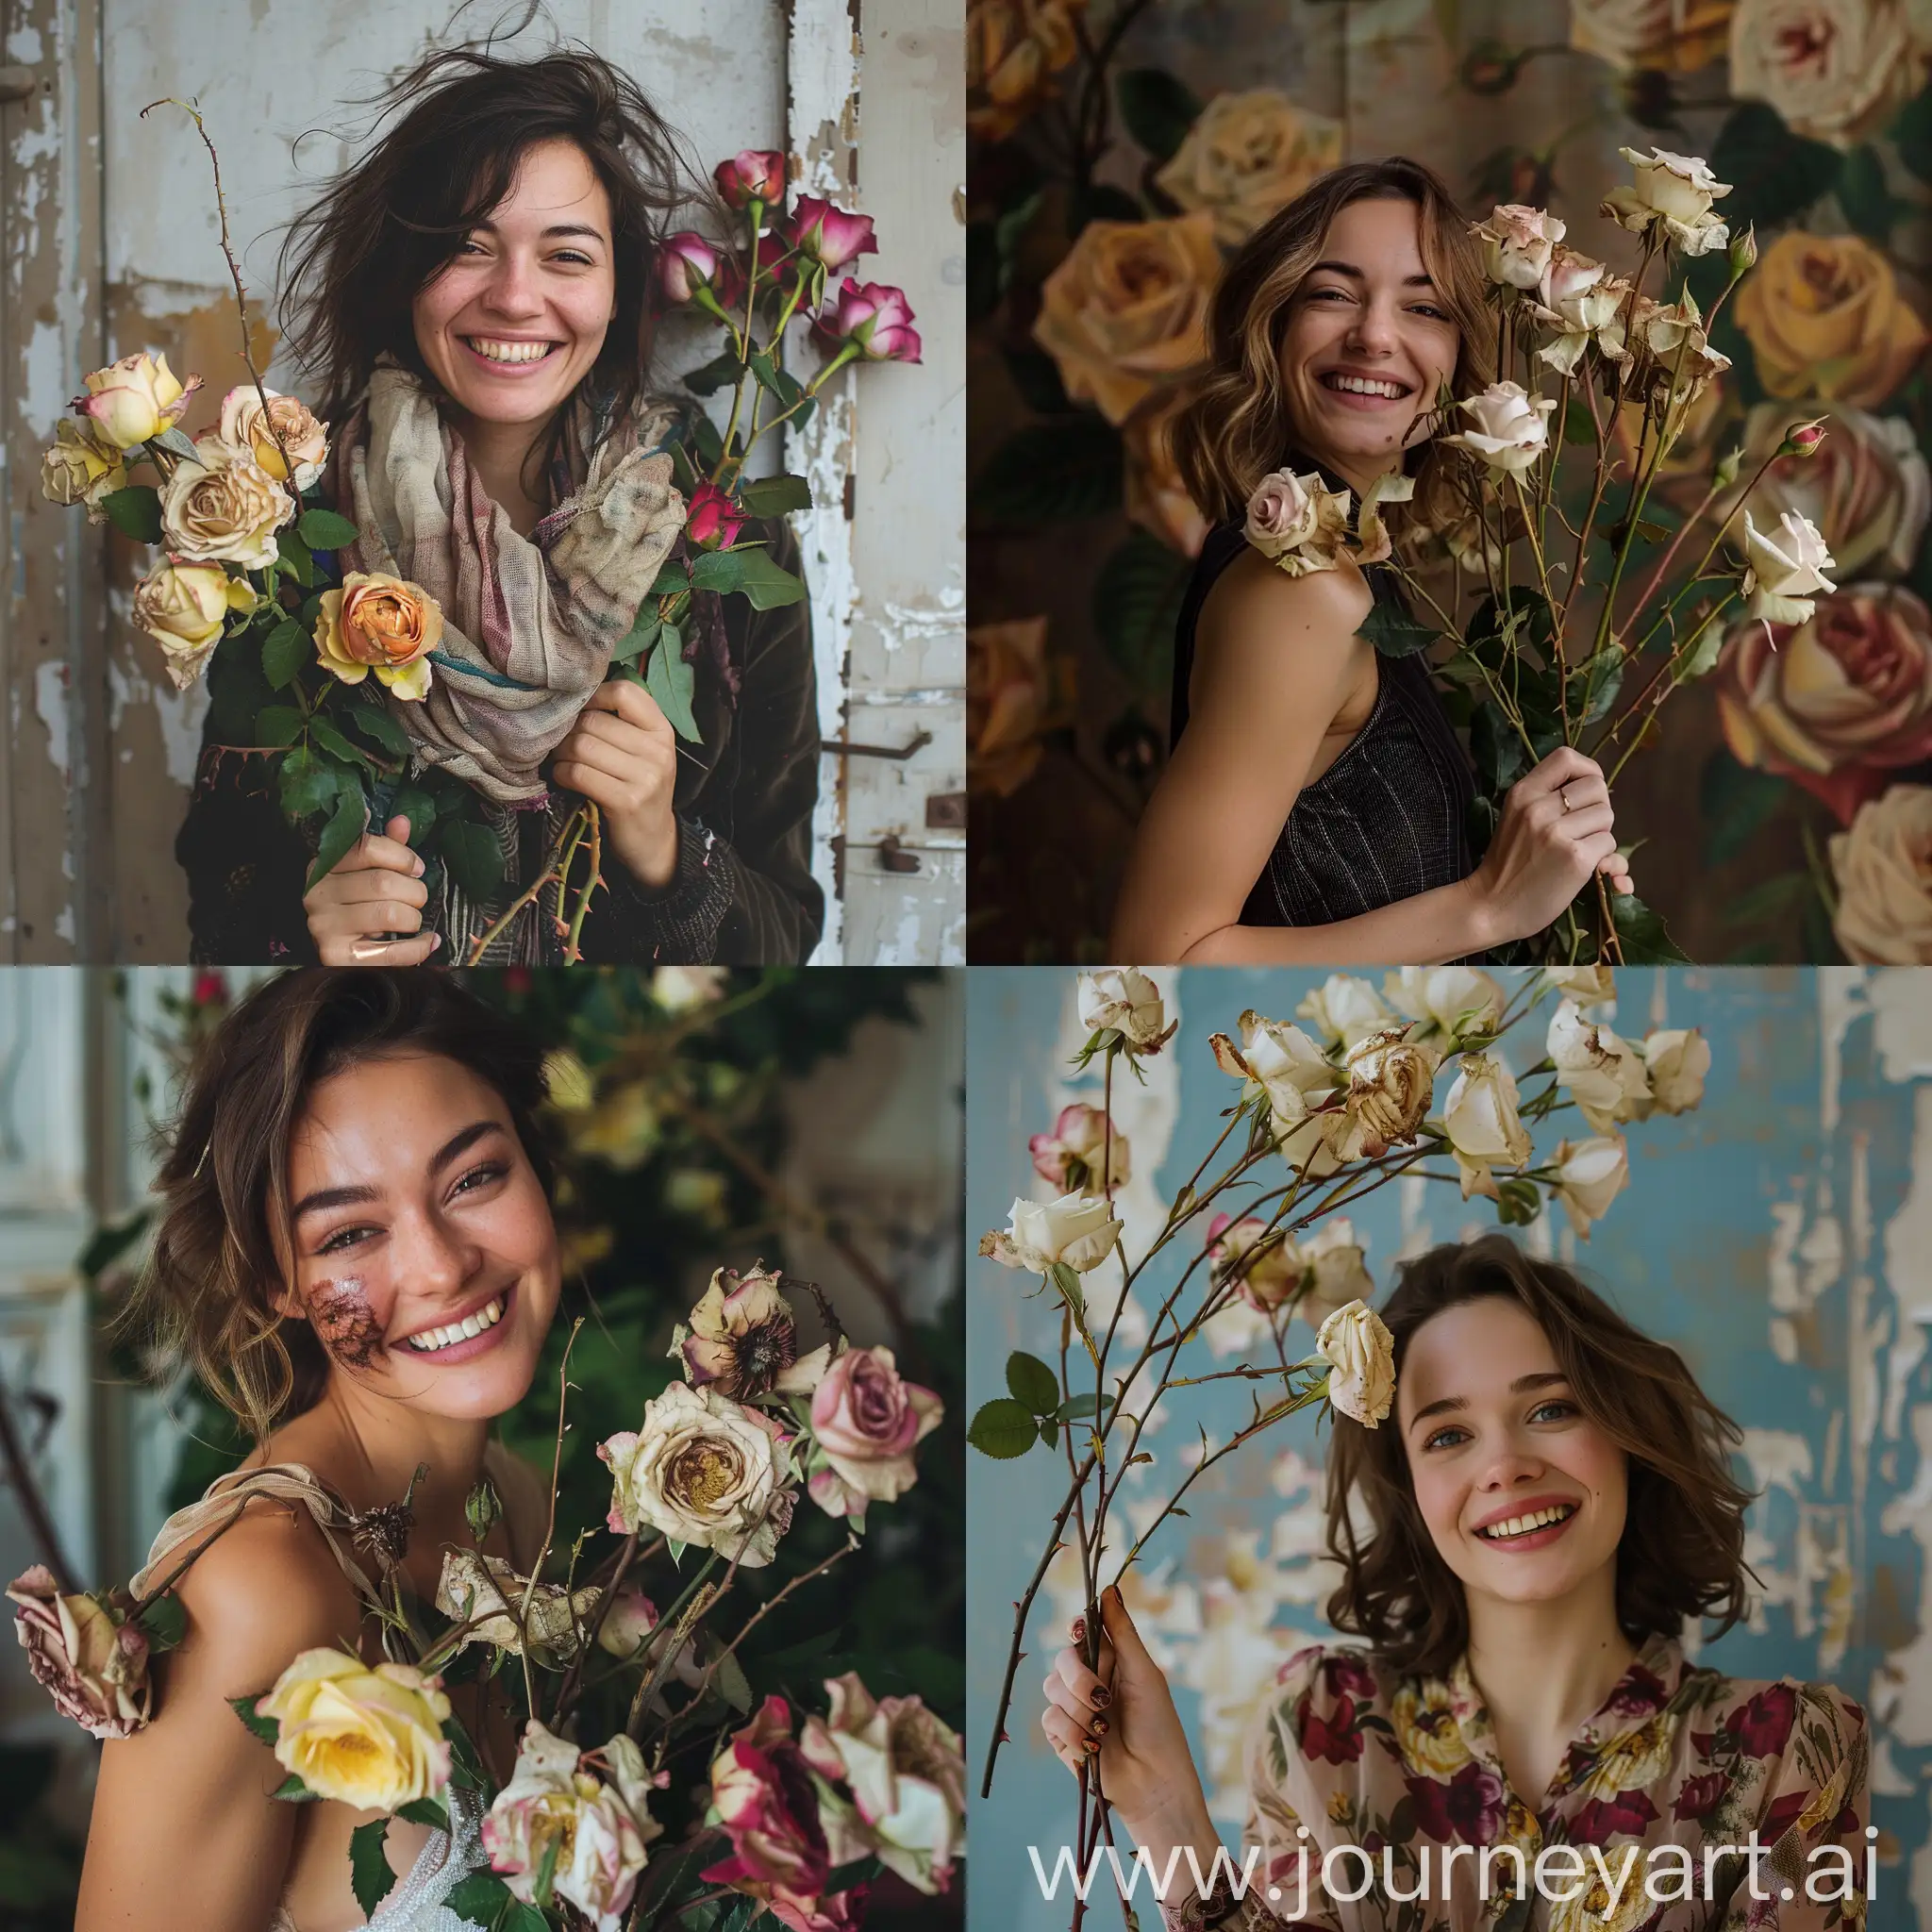 Smiling-Woman-Holding-Dead-Roses-and-Assorted-Flowers-Artistic-Floral-Composition